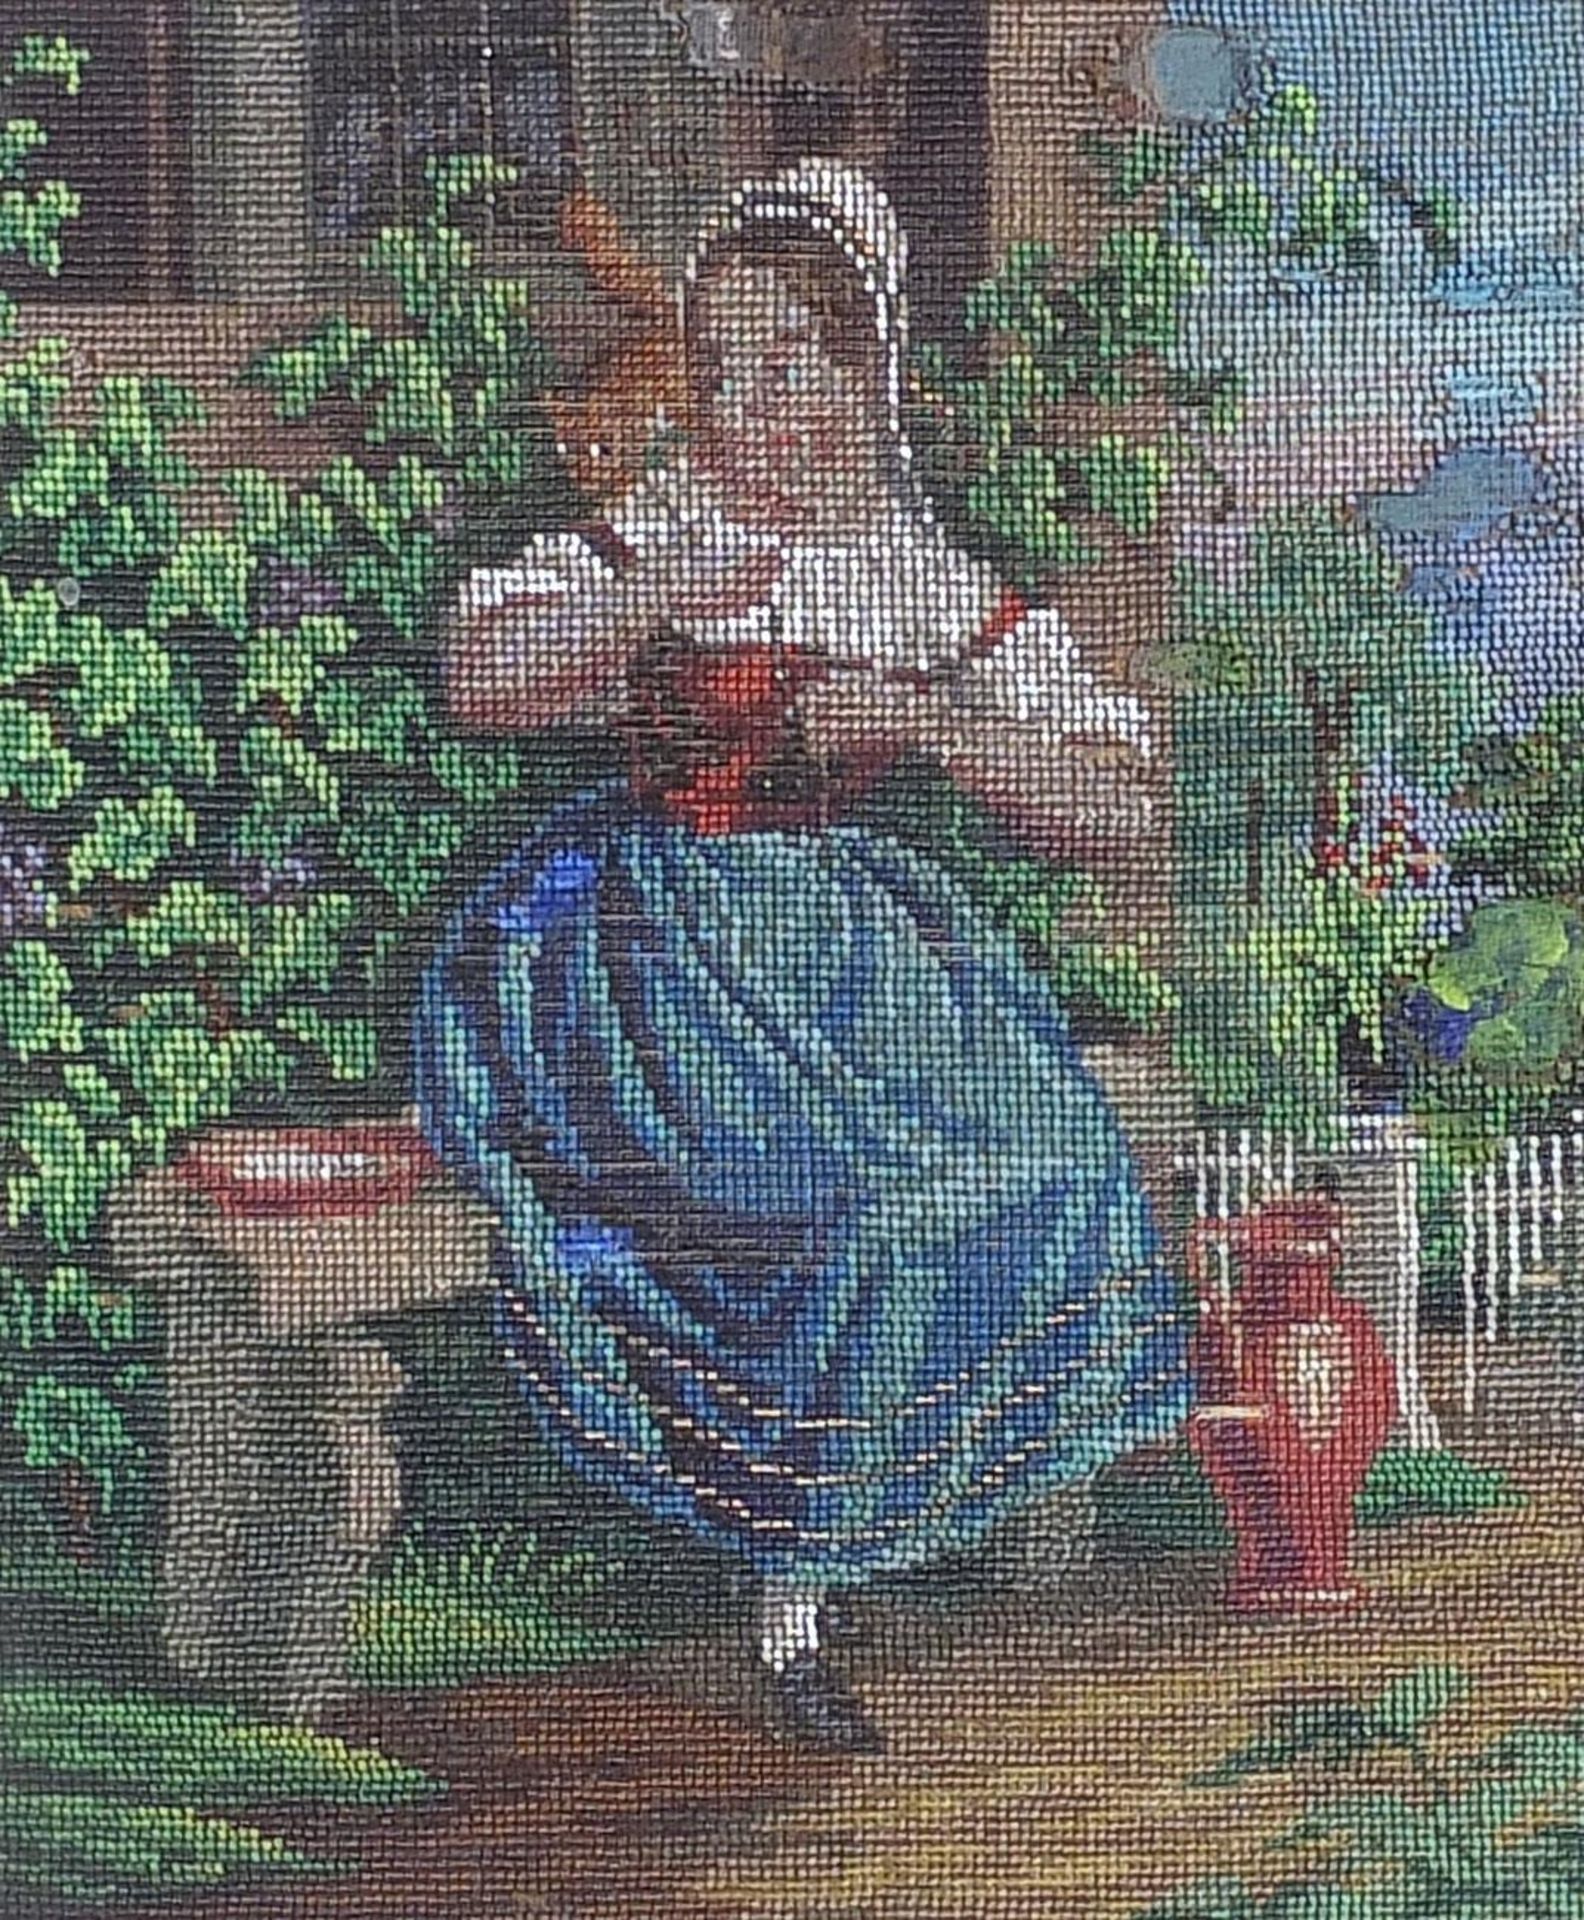 Girl with cat, 19th century beadwork panel, mounted, framed and glazed, 20cm x 16.5cm excluding